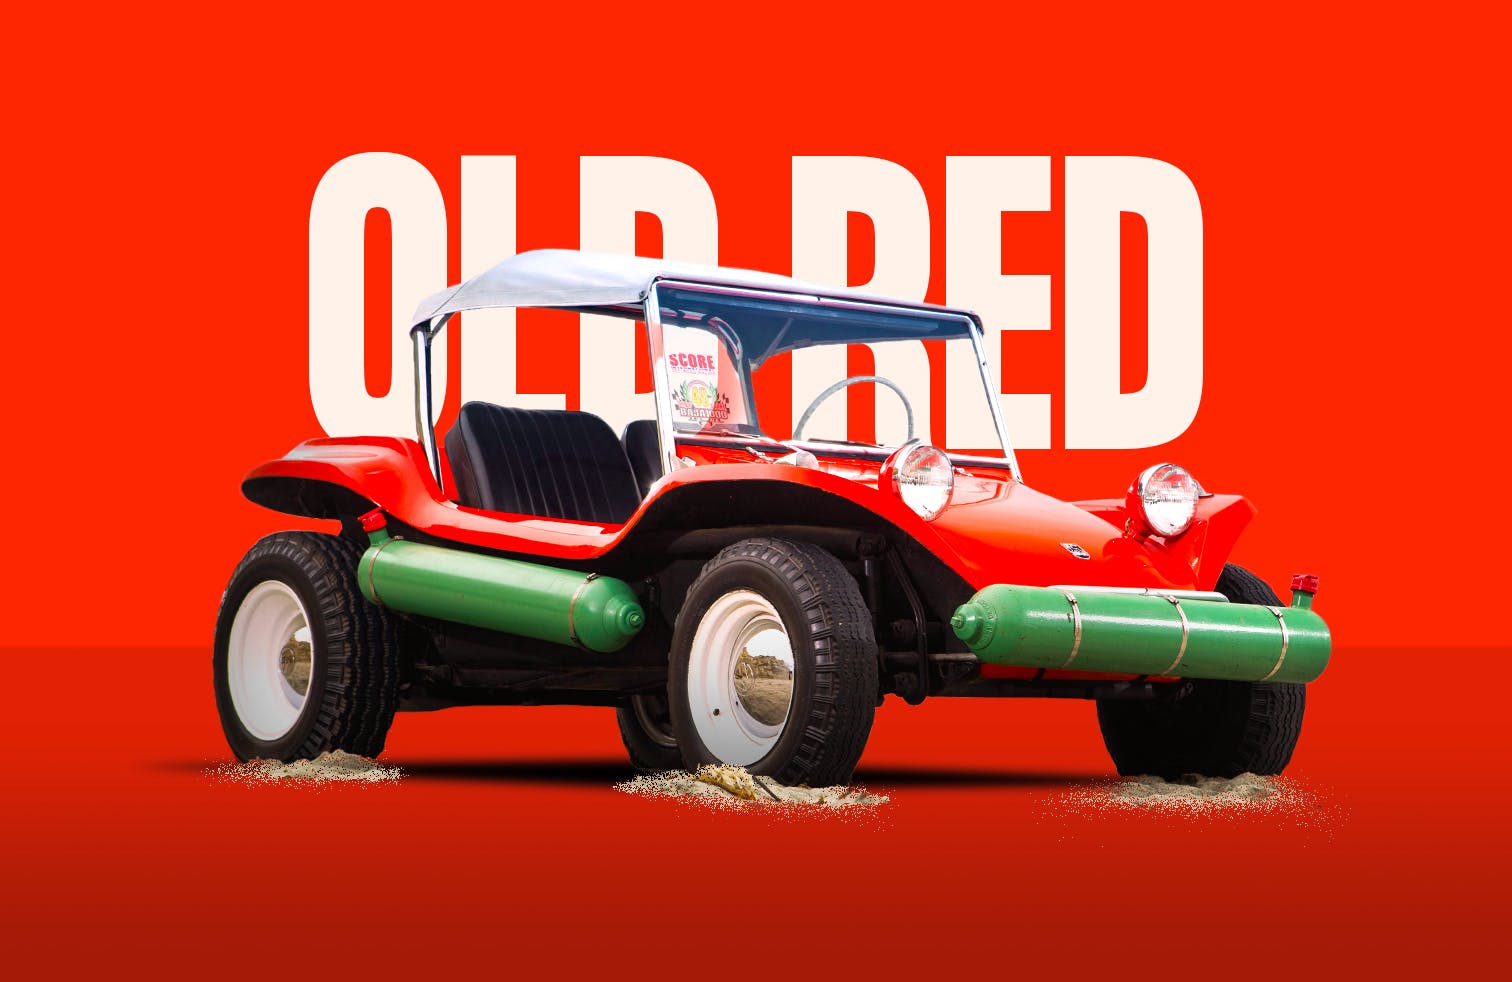 Old manx buggy on red background